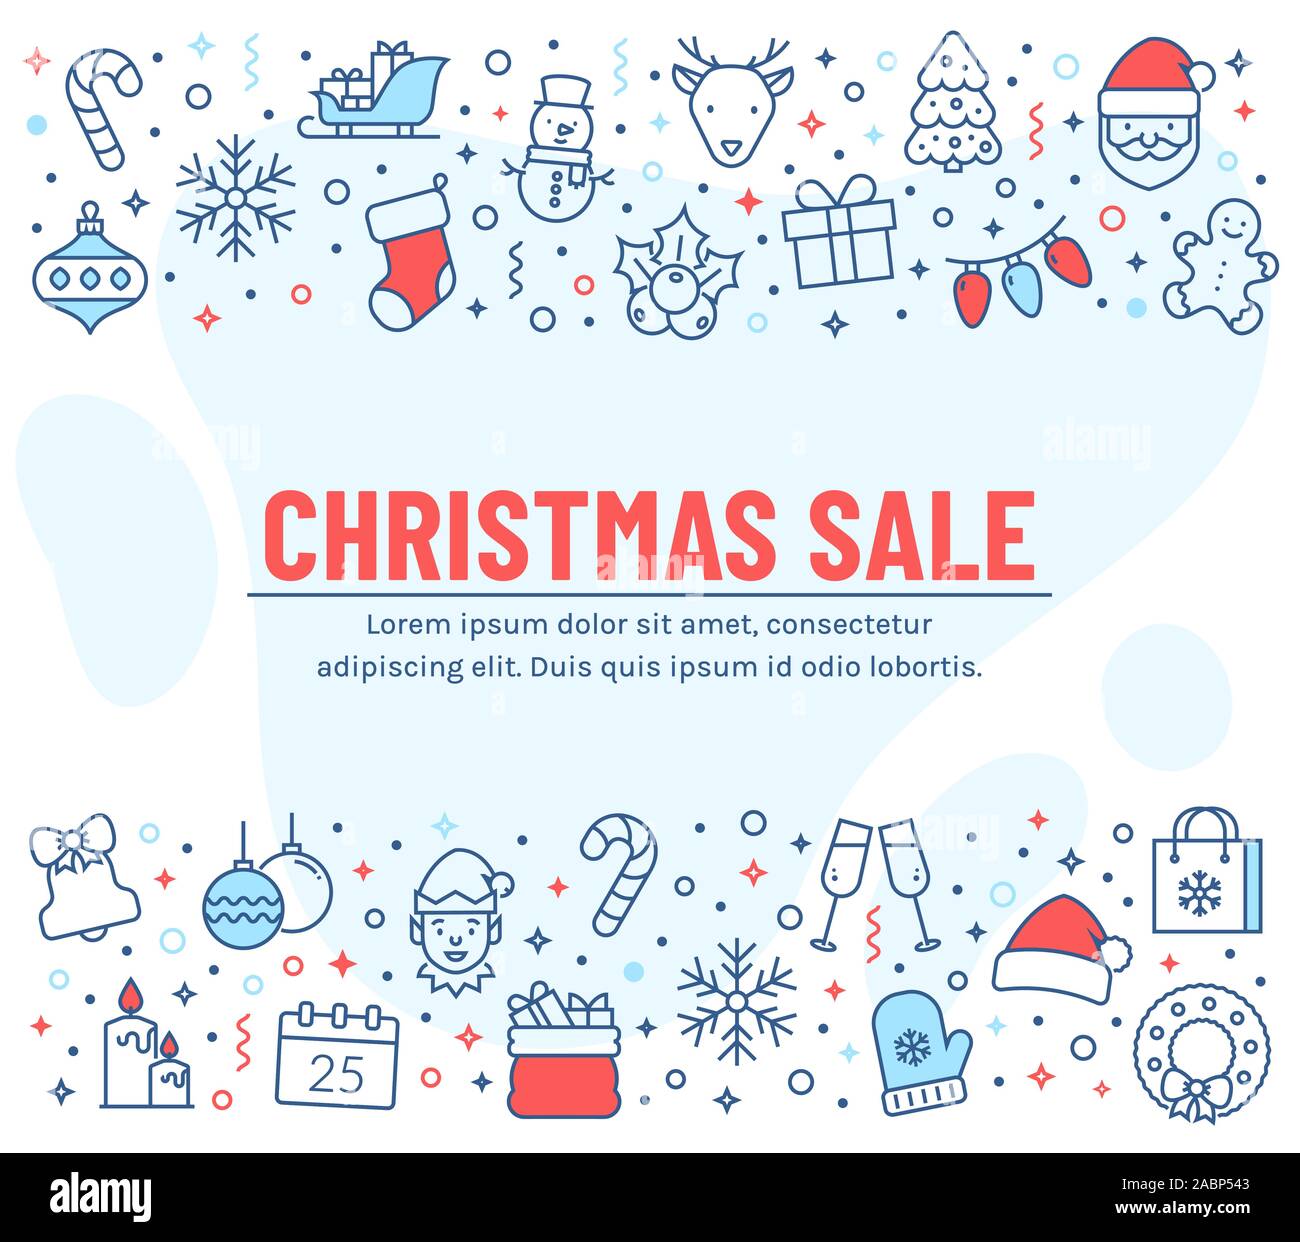 Christmas sale banner with outline icons. Vector background with line symbols and copy space for your text. Concept for winter holidays discounts. Stock Vector